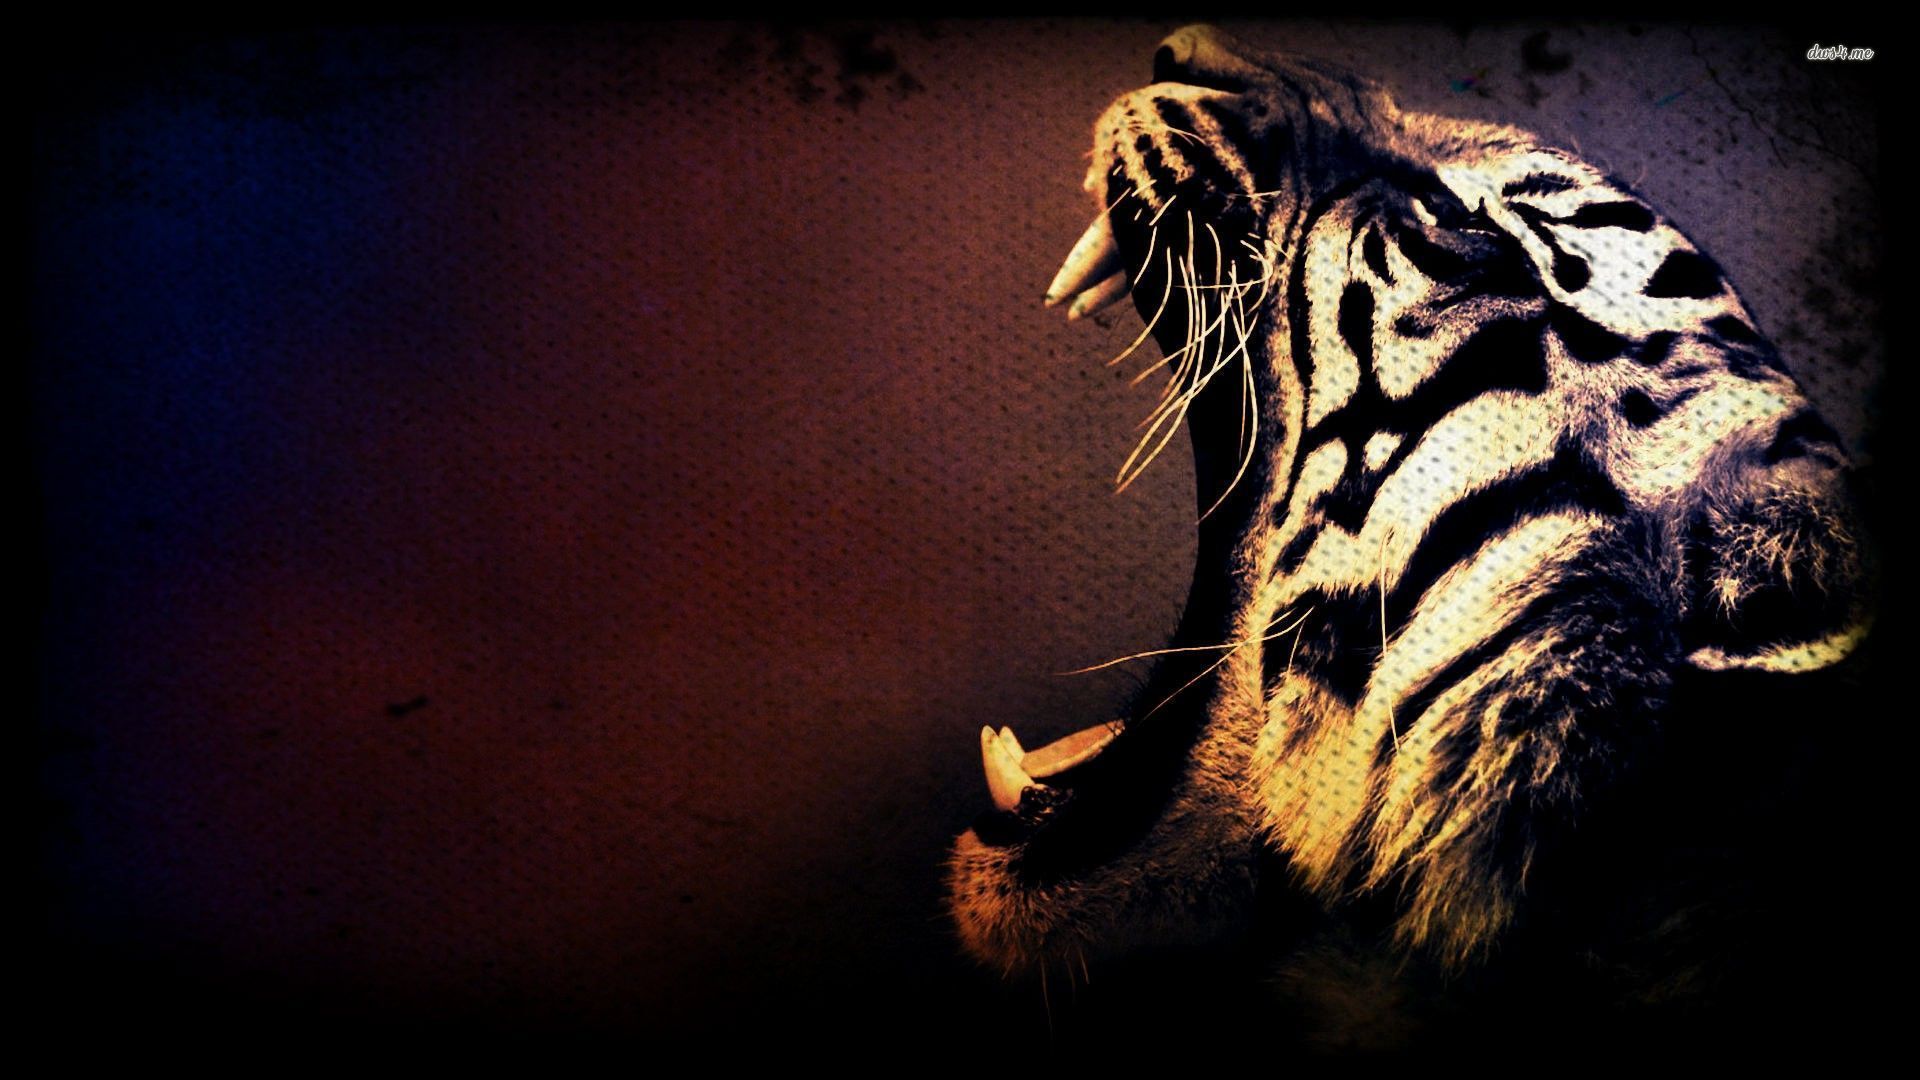 Tiger Background Wallpapers 2215 - HD Wallpaper Site